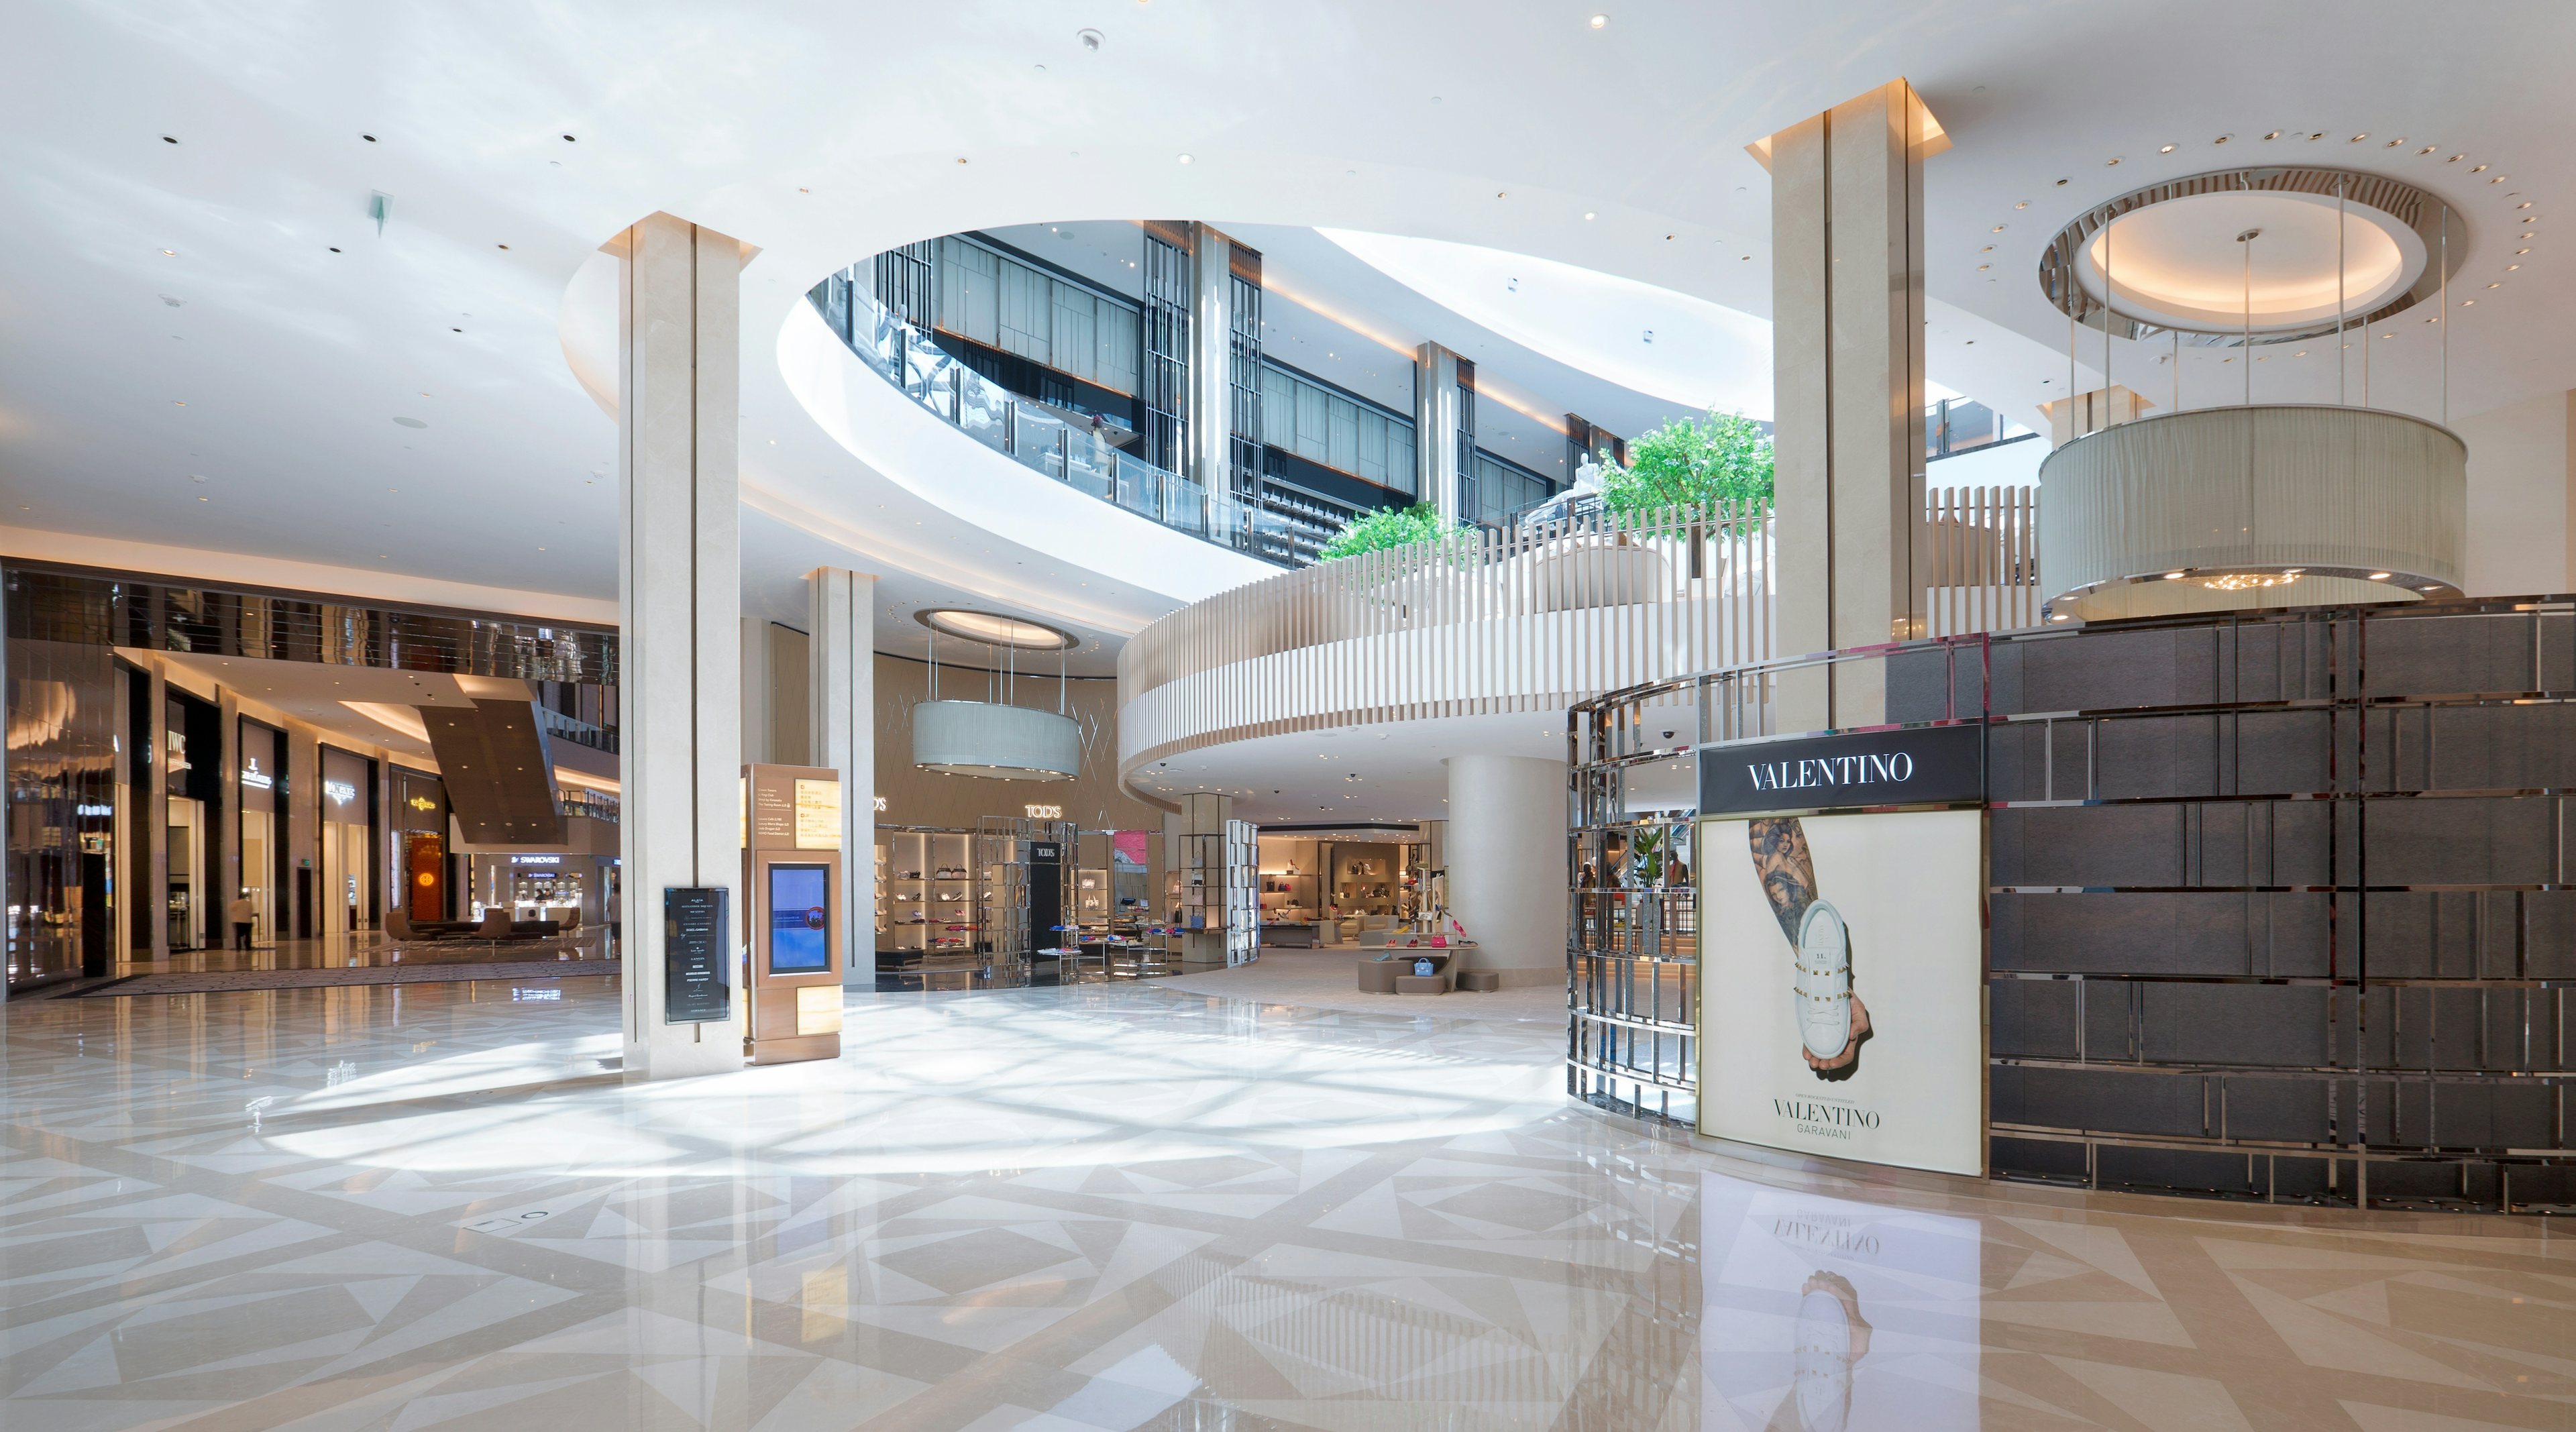 T Galleria by DFS's renovated shopping area in Cotai's City of Dreams will boast 31 new luxury brands once completed later this year. (Courtesy Photo)